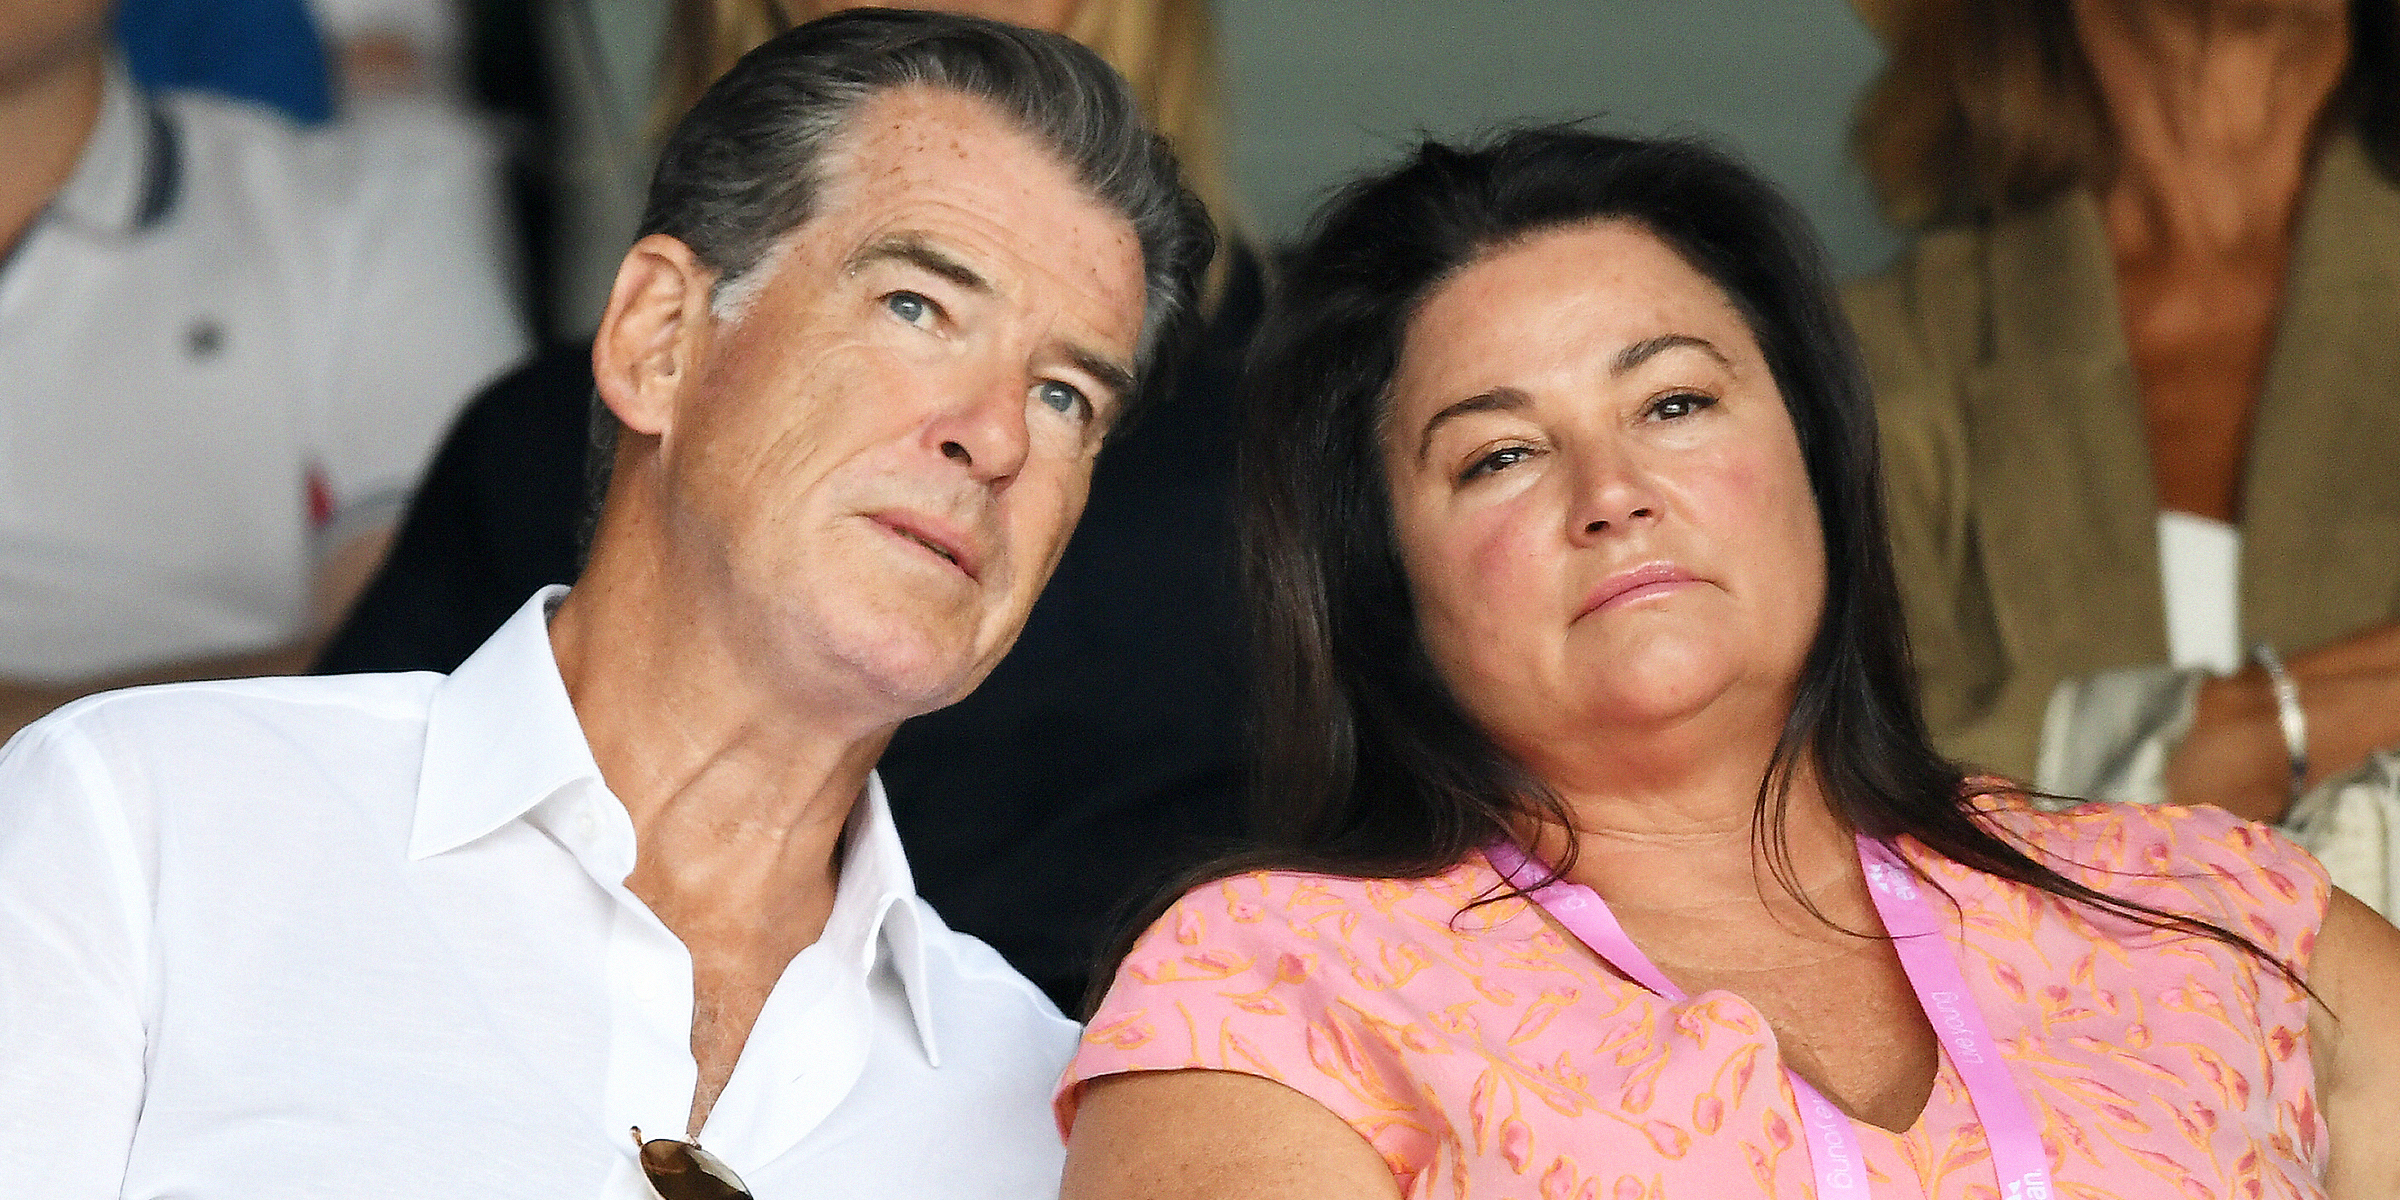 Pierce Brosnan and Keely Shaye | Source: Getty Images